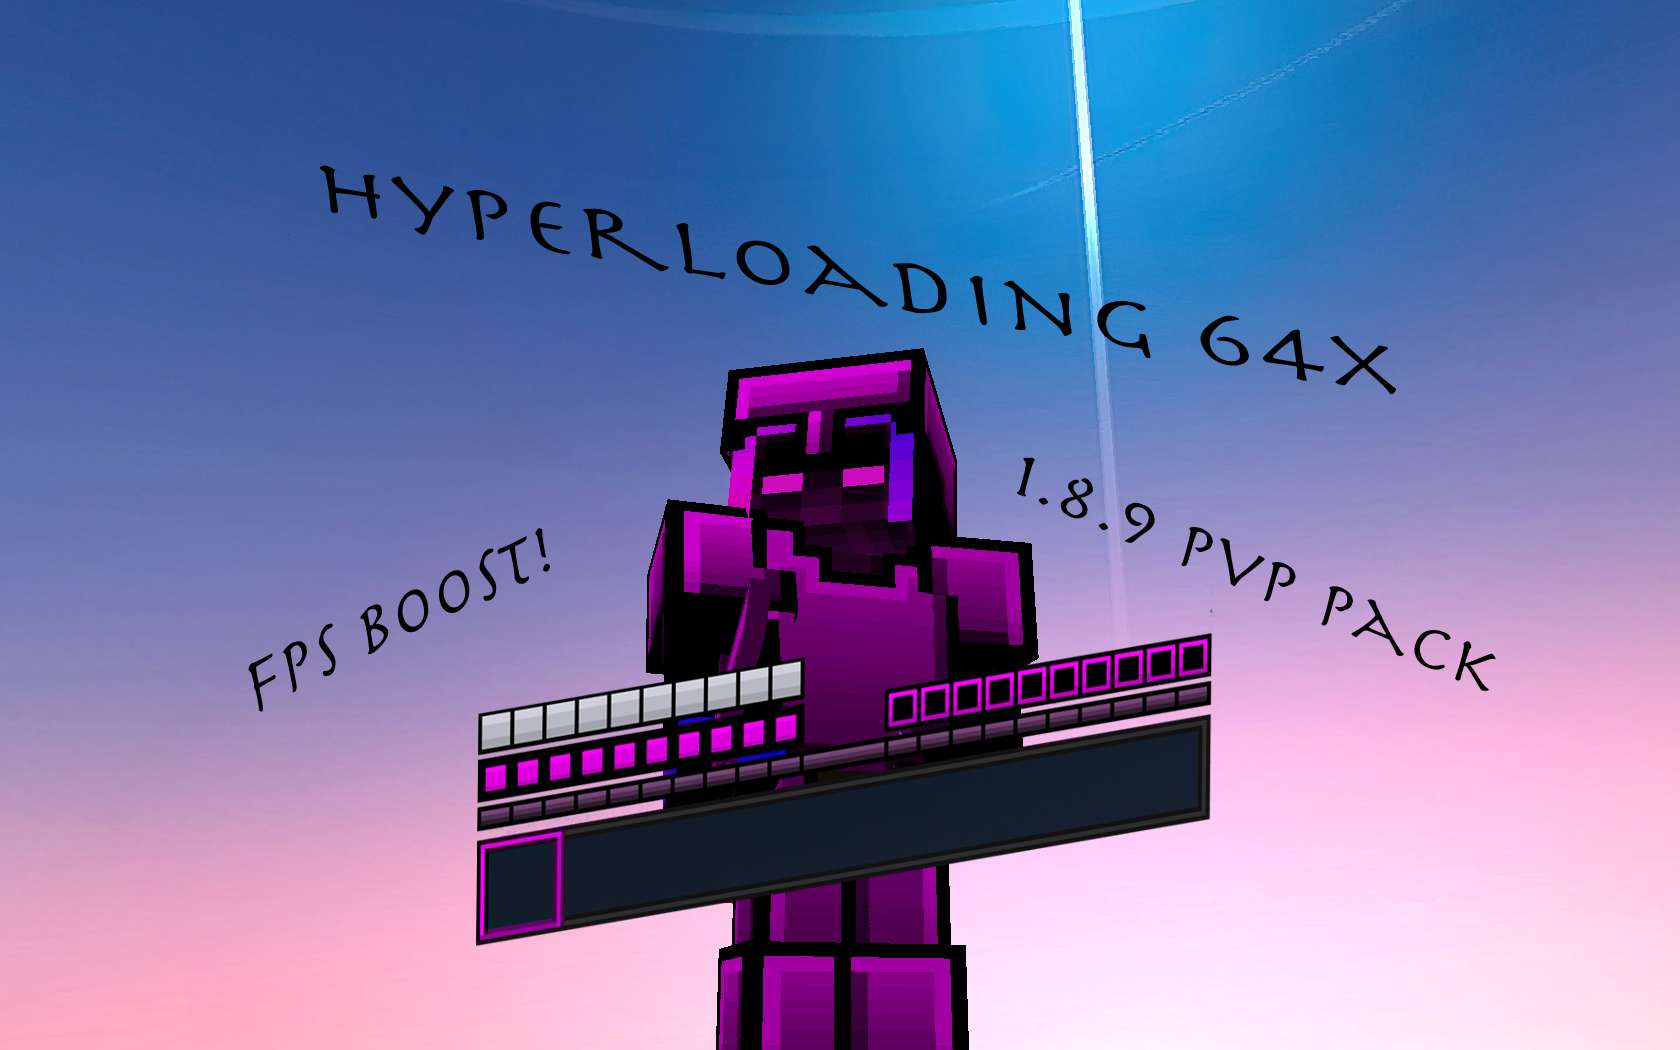 HyperLoading 64 by VoidlessClicker on PvPRP